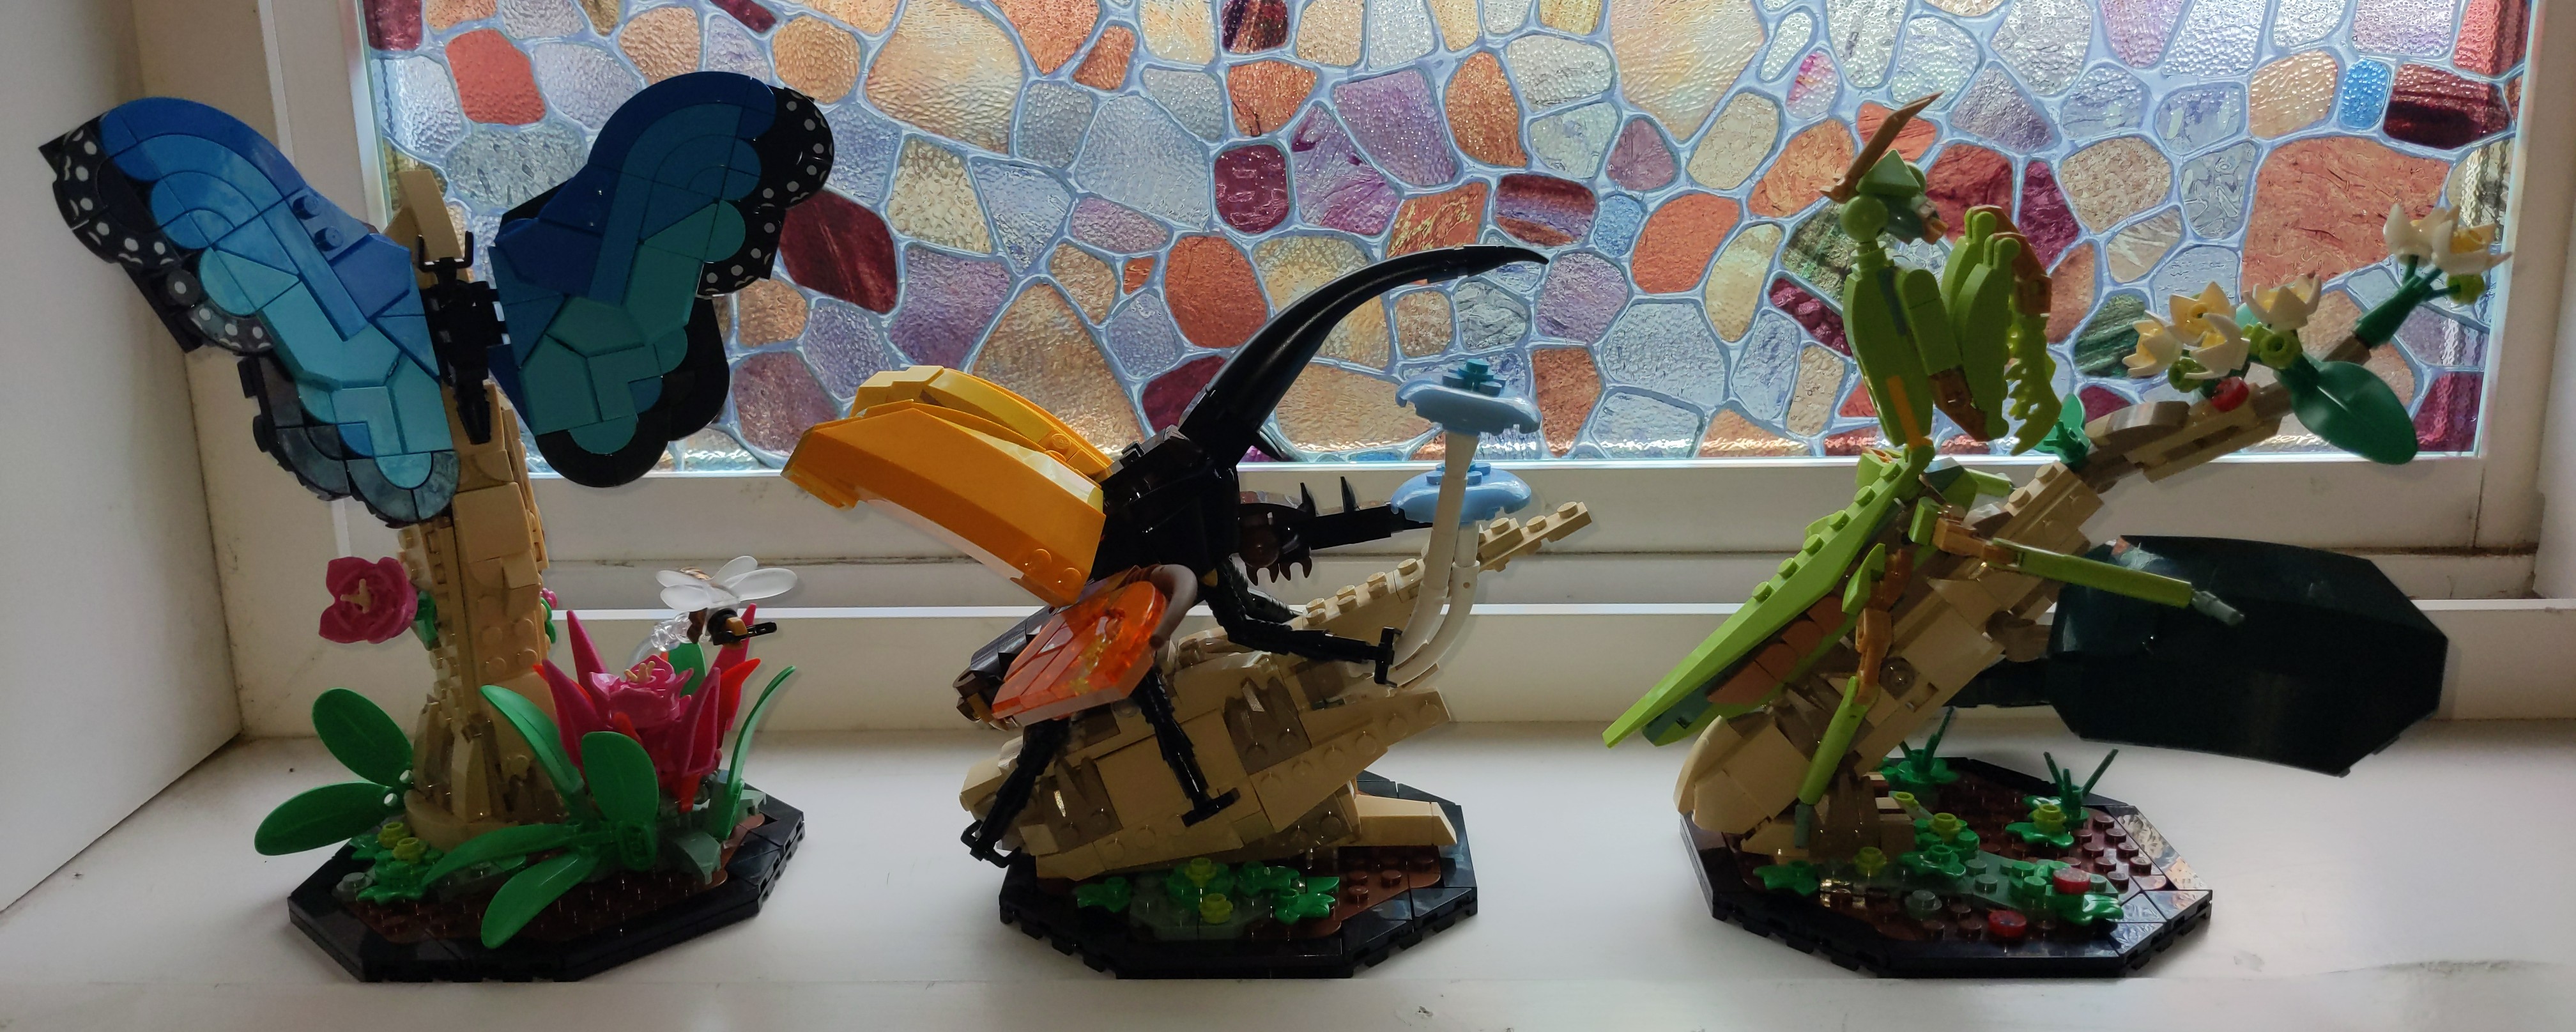 Roughly to-scale sized Lego models of a blue morpho butterfly, a hercules beetle, and a chinese mantis.